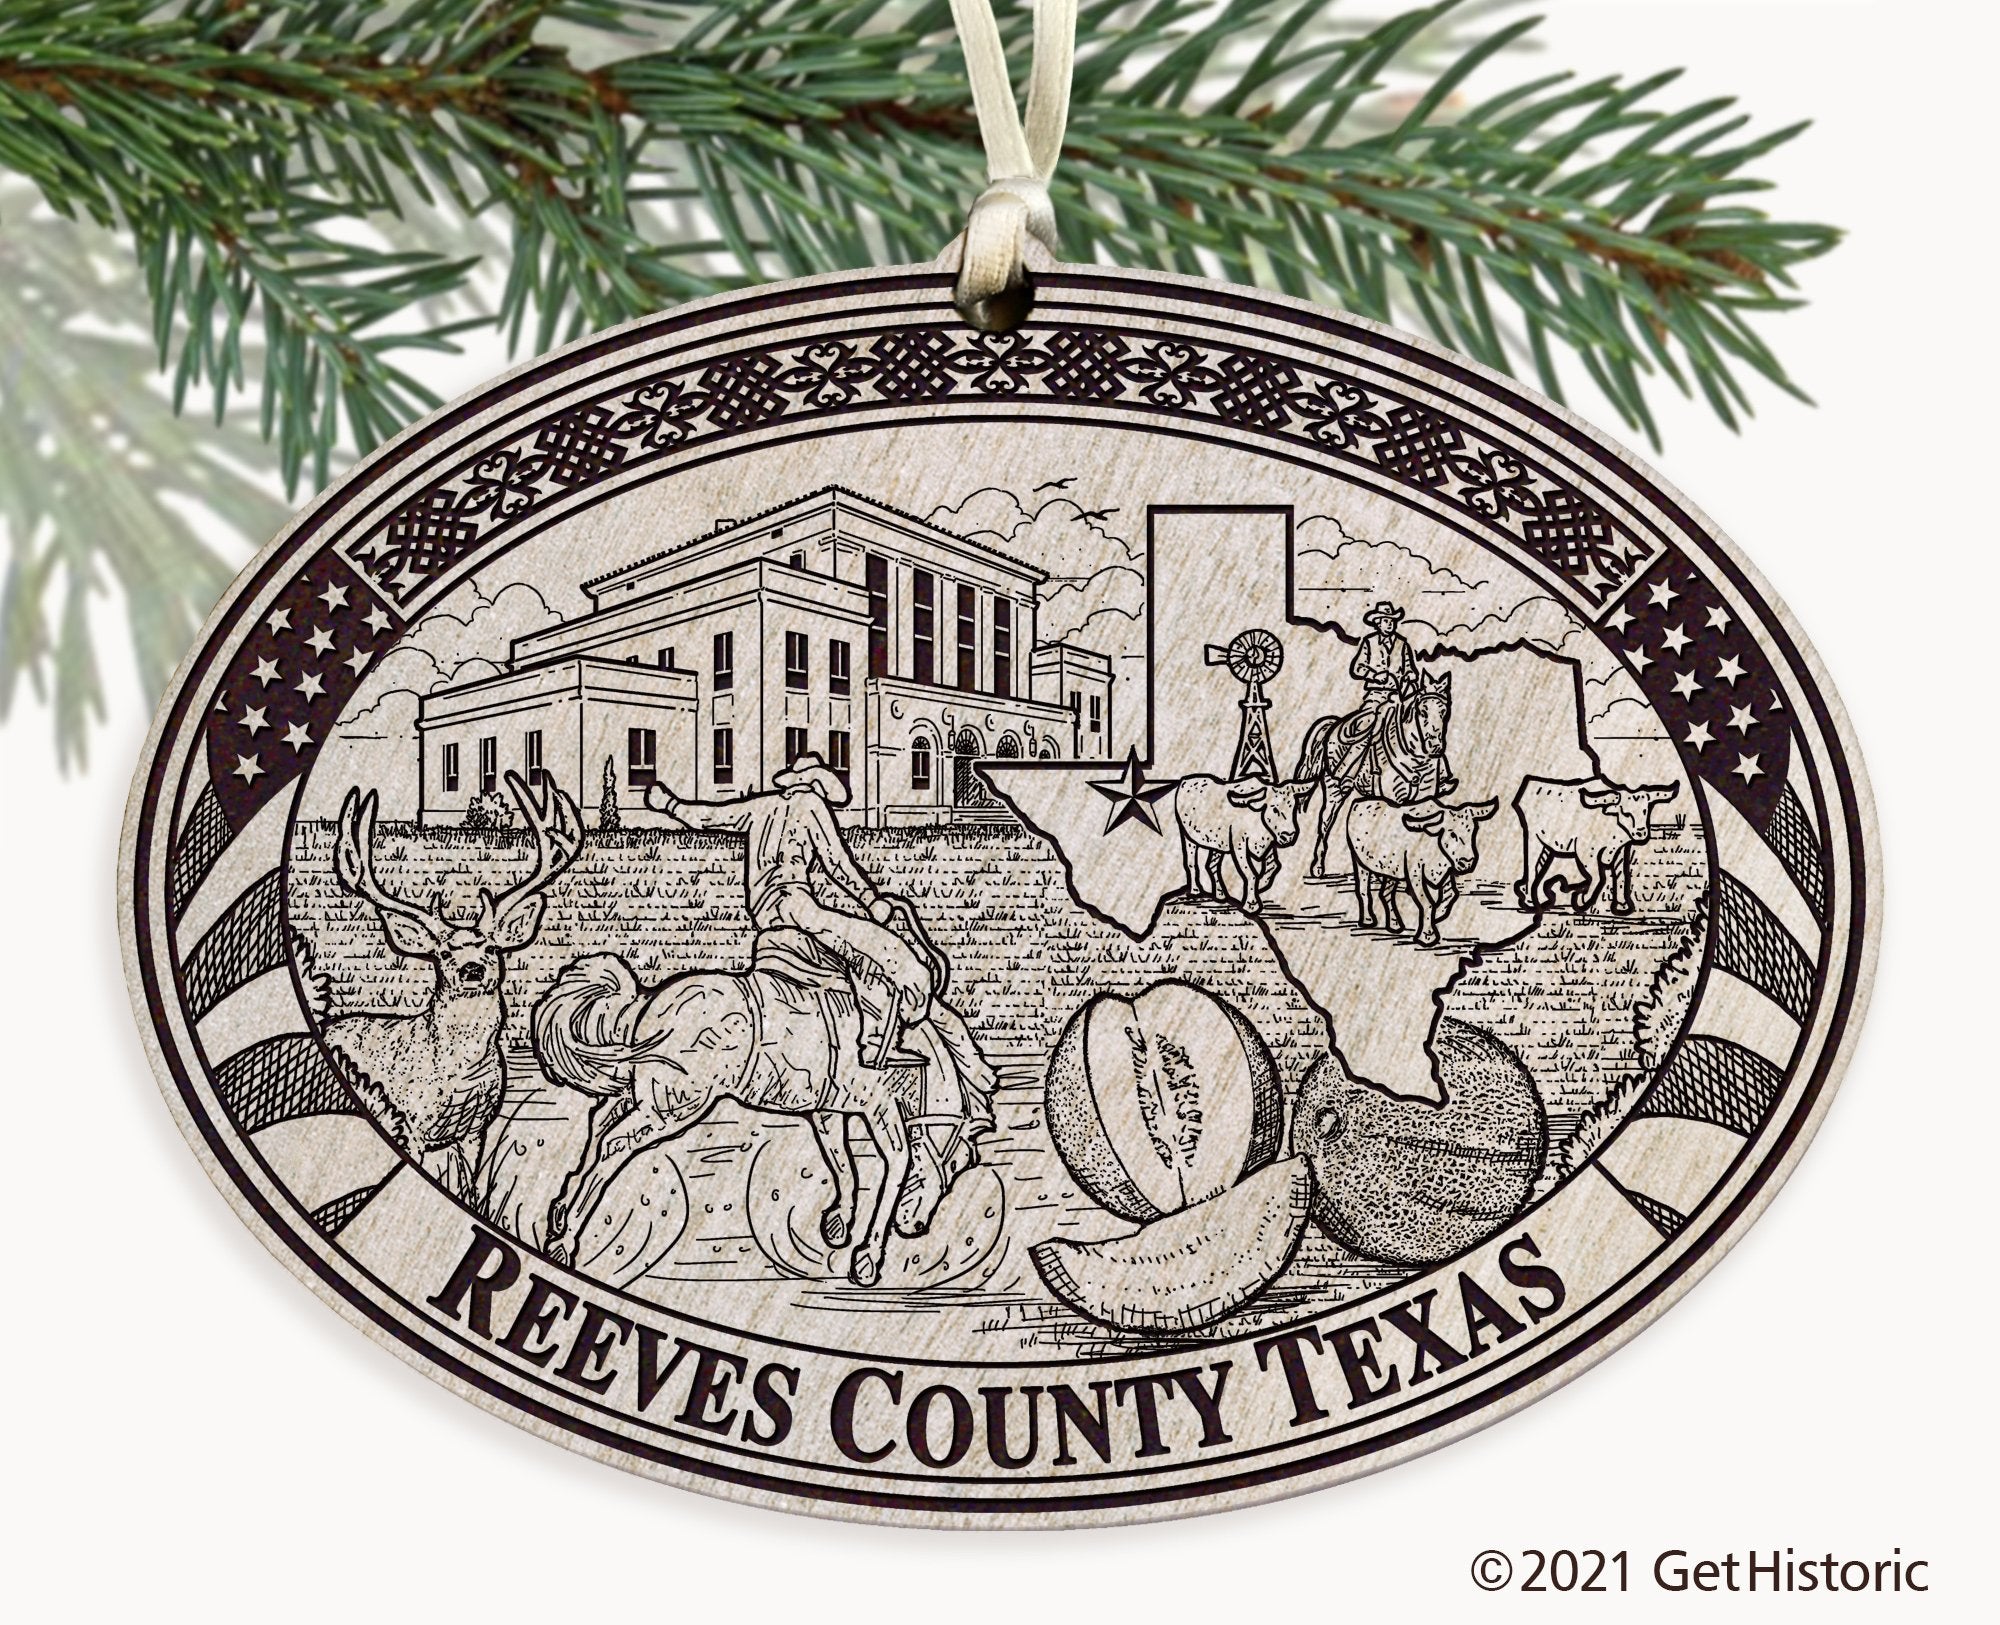 Reeves County Texas Engraved Ornament